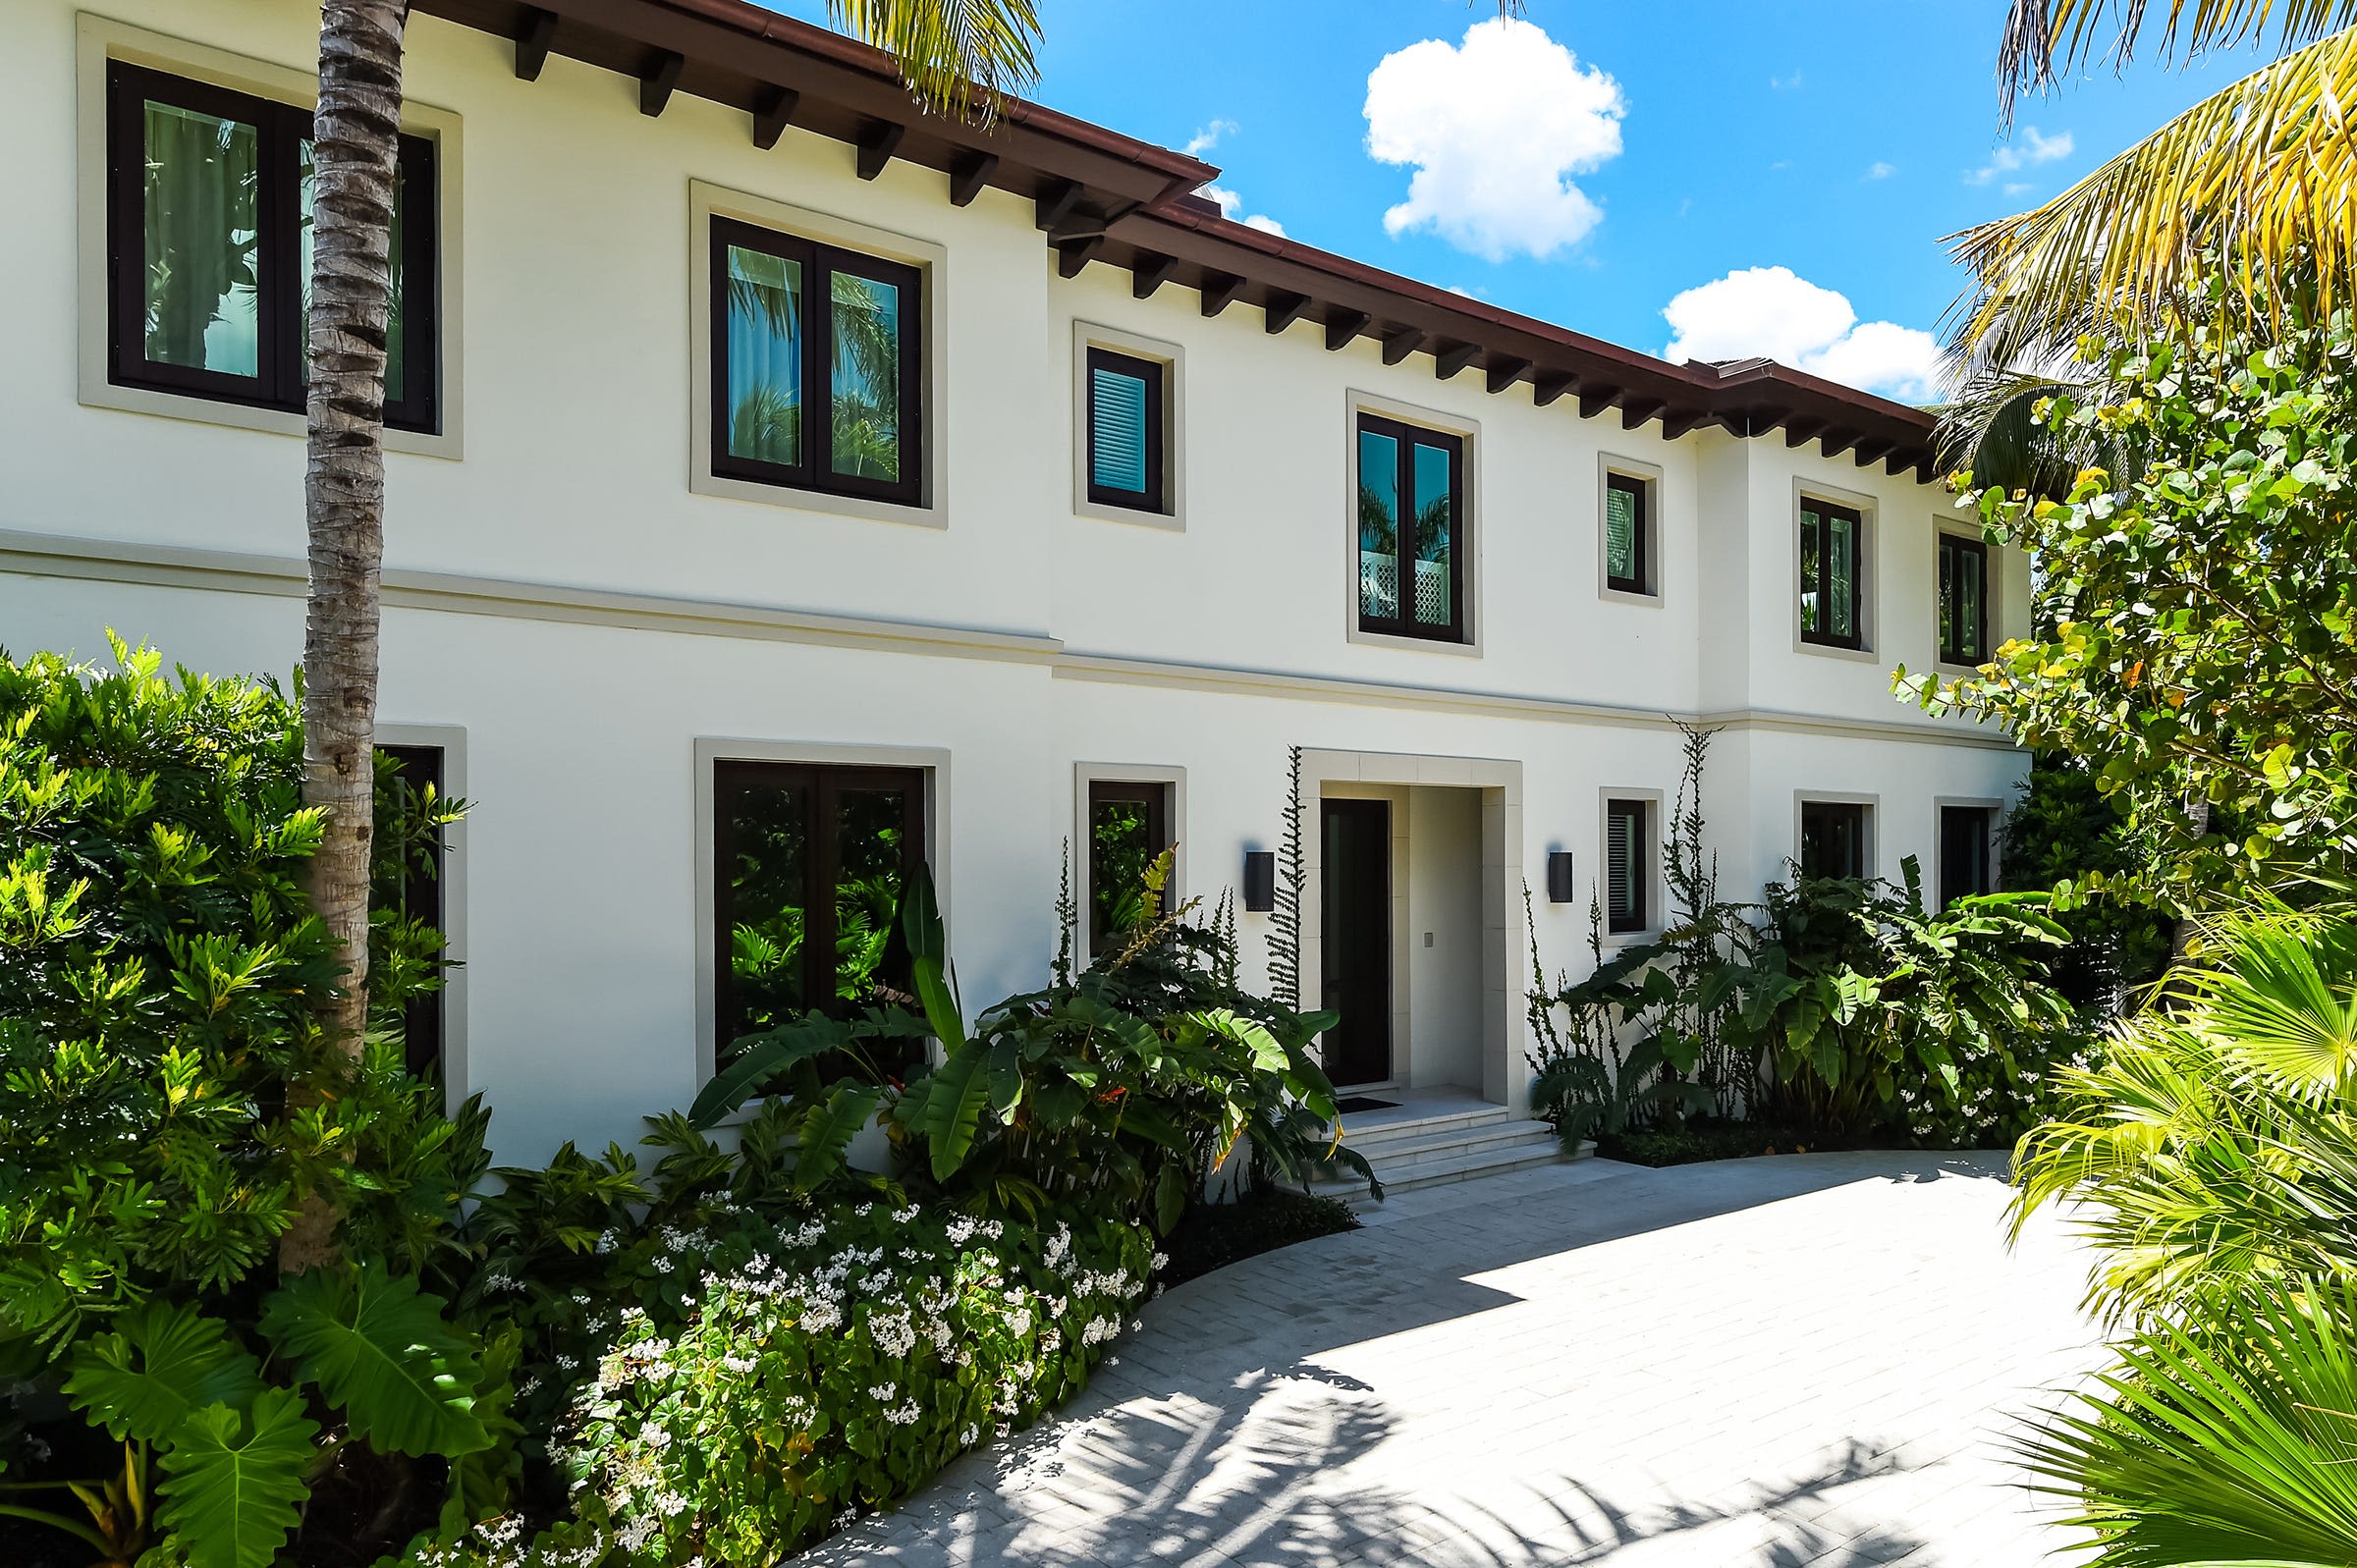 North End Palm Beach house fetches $25 million three years after selling for $17 million